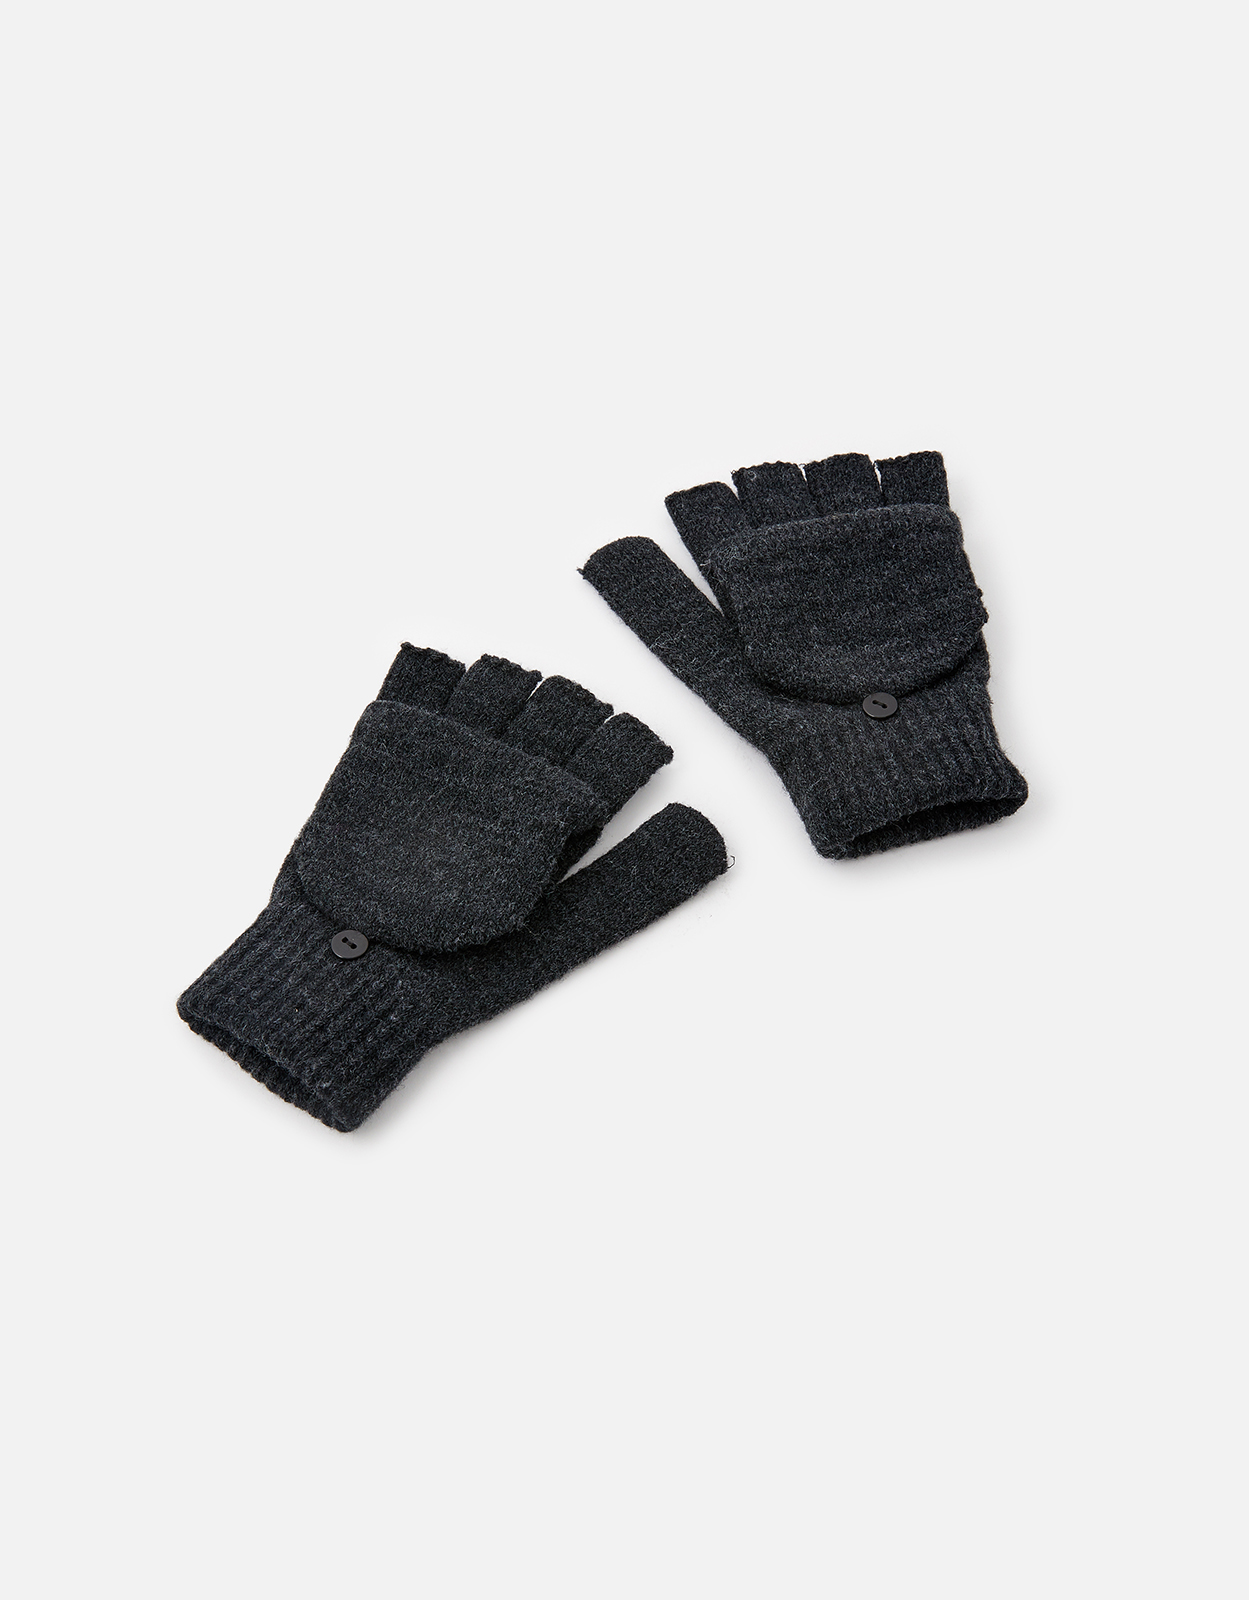 Accessorize Grey Plain Capped Gloves, Size: One Size